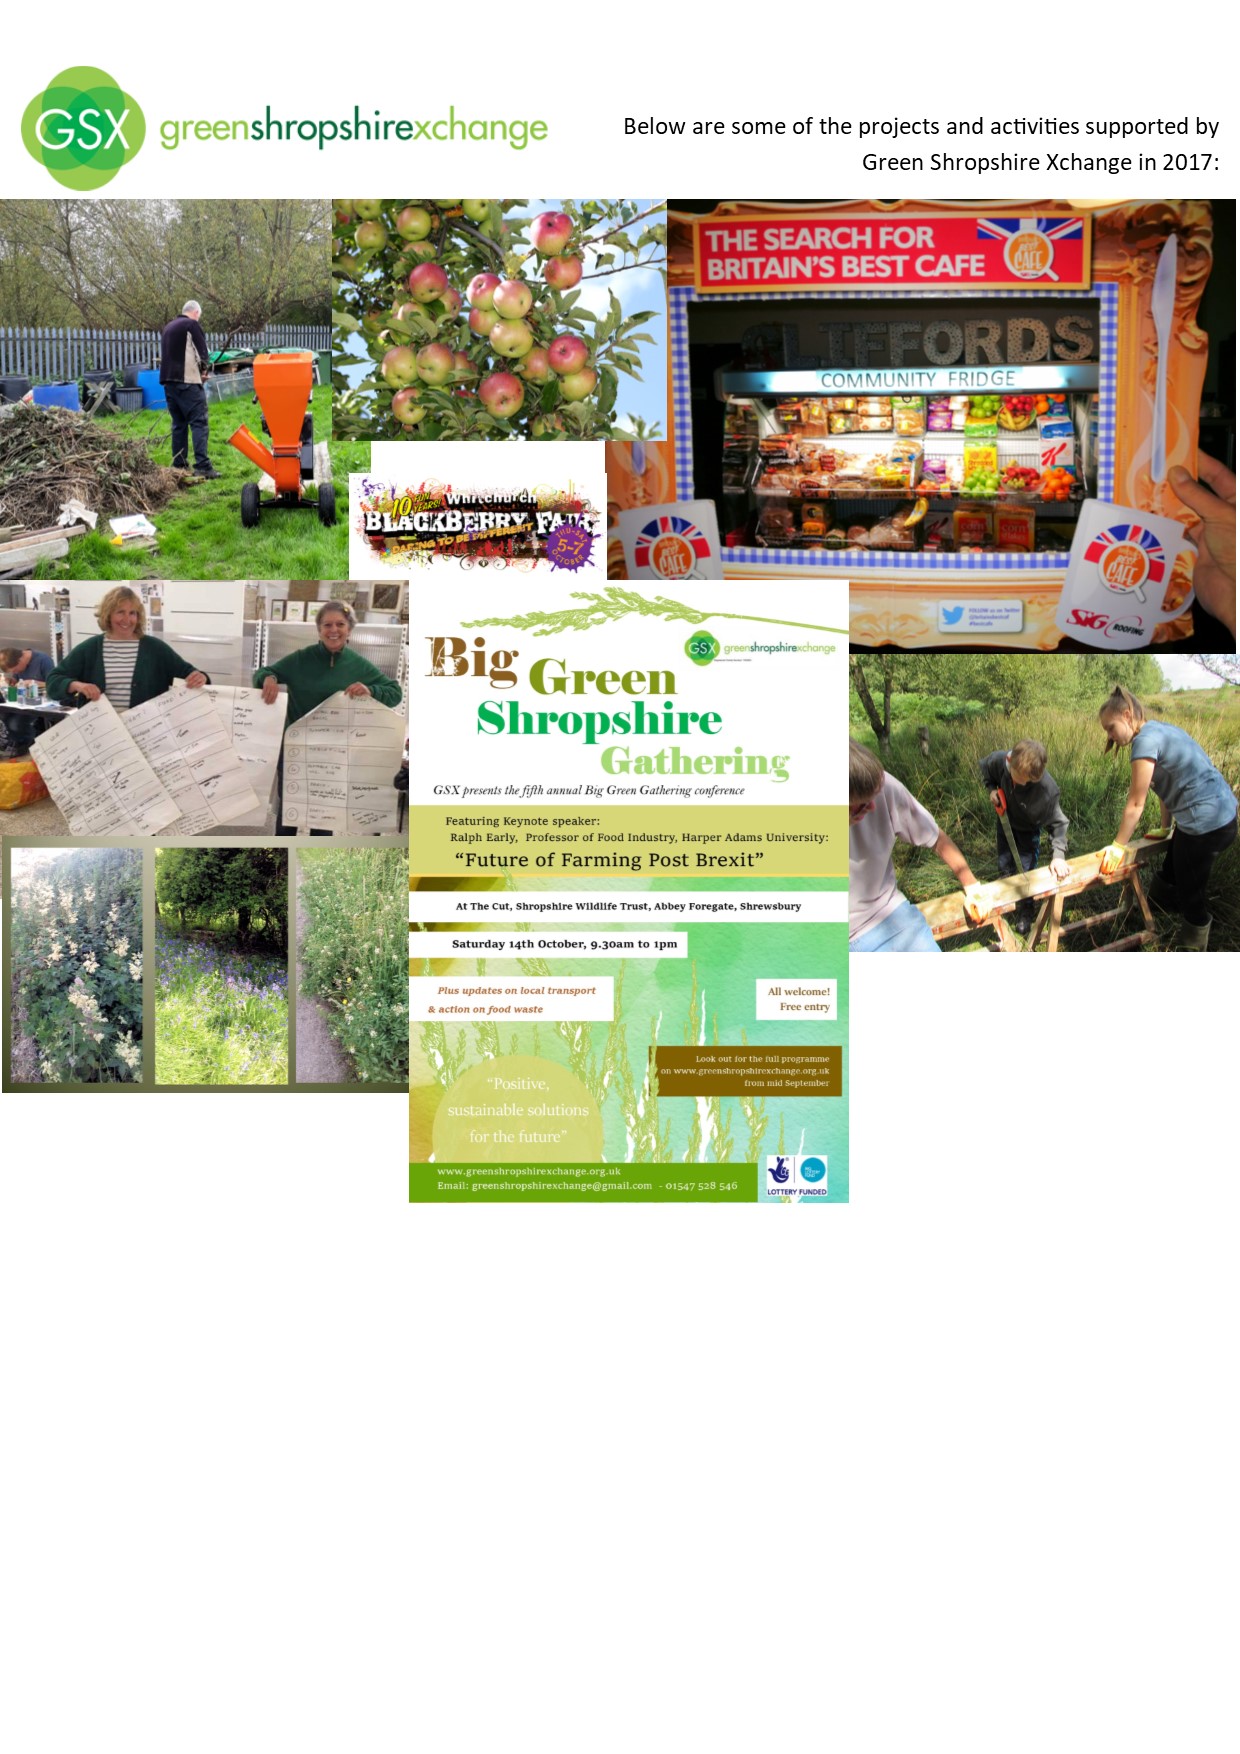 Some of the projects and activities that Green Shropshire Xchange (GSX) supported in 2017